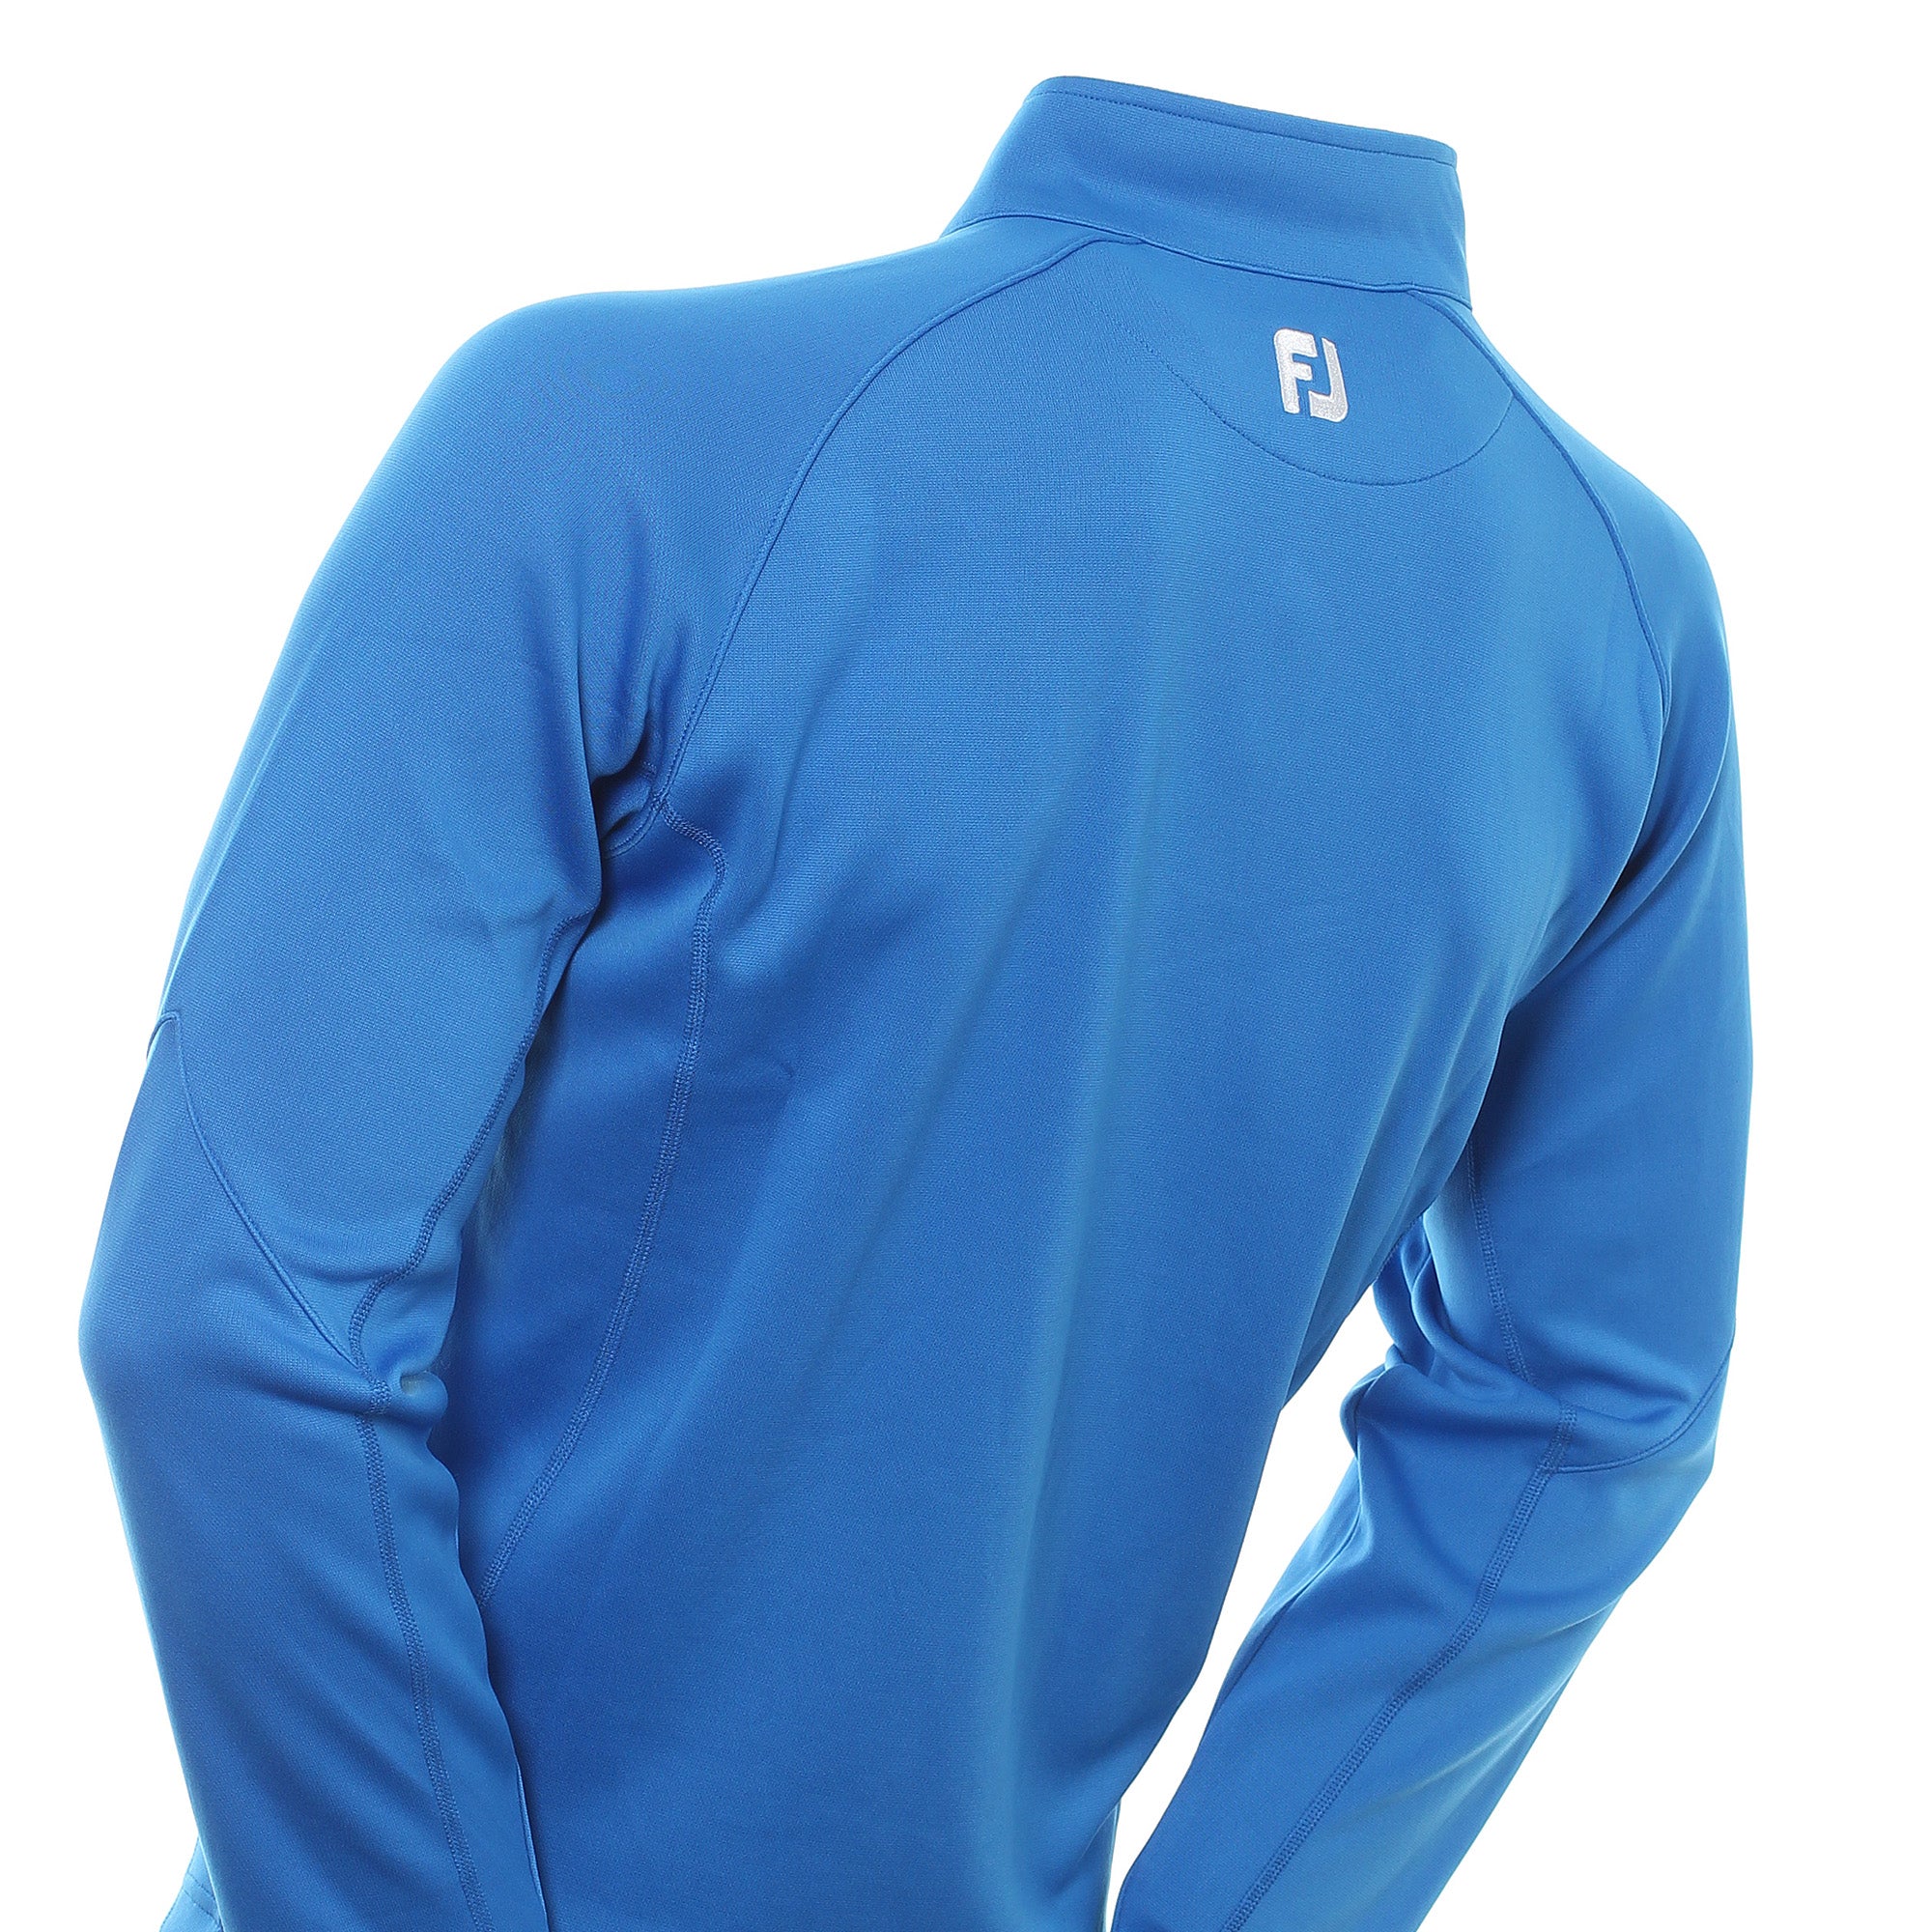 footjoy-solid-knit-chill-out-pullover-90148-cobalt